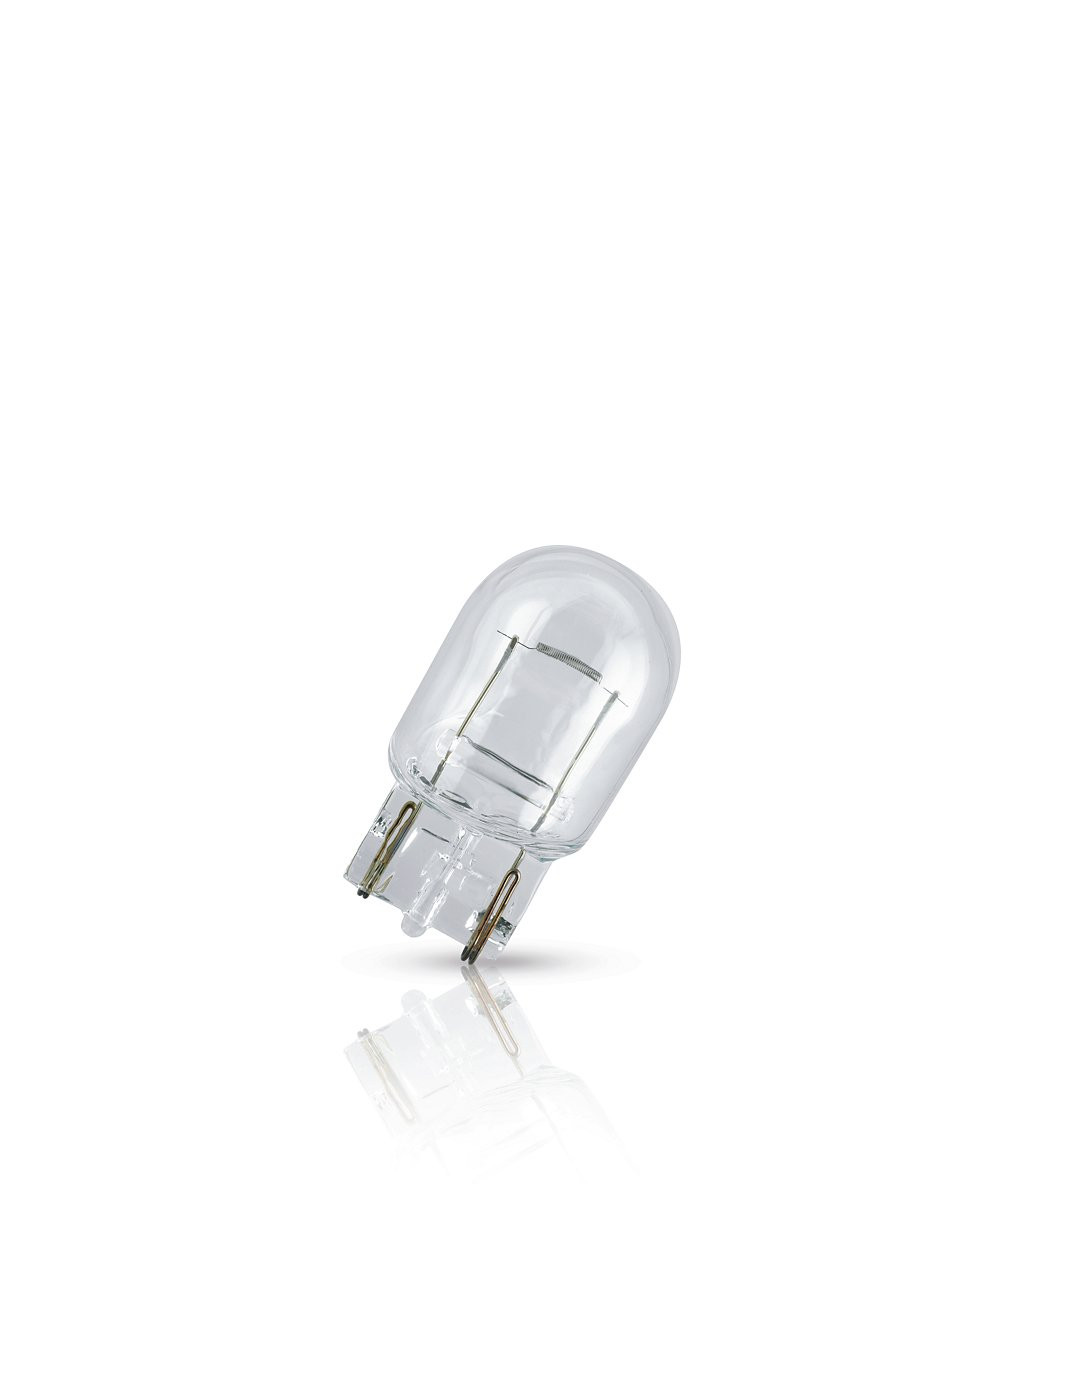 Philips Vision 2st. W21W 12V 21W W3x16d Blister Lampe Birne